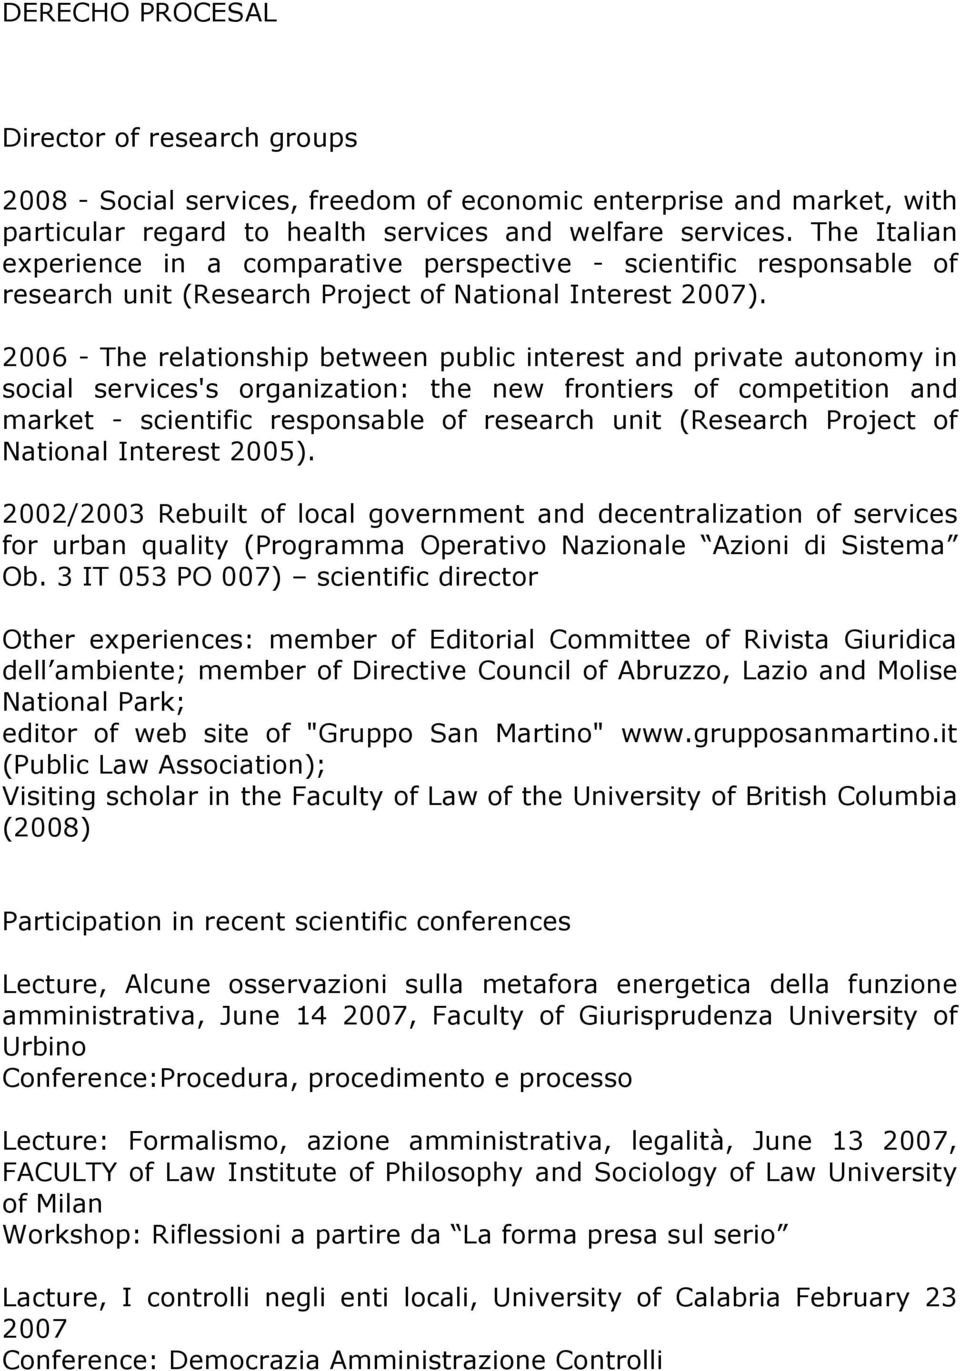 2006 - The relationship between public interest and private autonomy in social services's organization: the new frontiers of competition and market - scientific responsable of research unit (Research